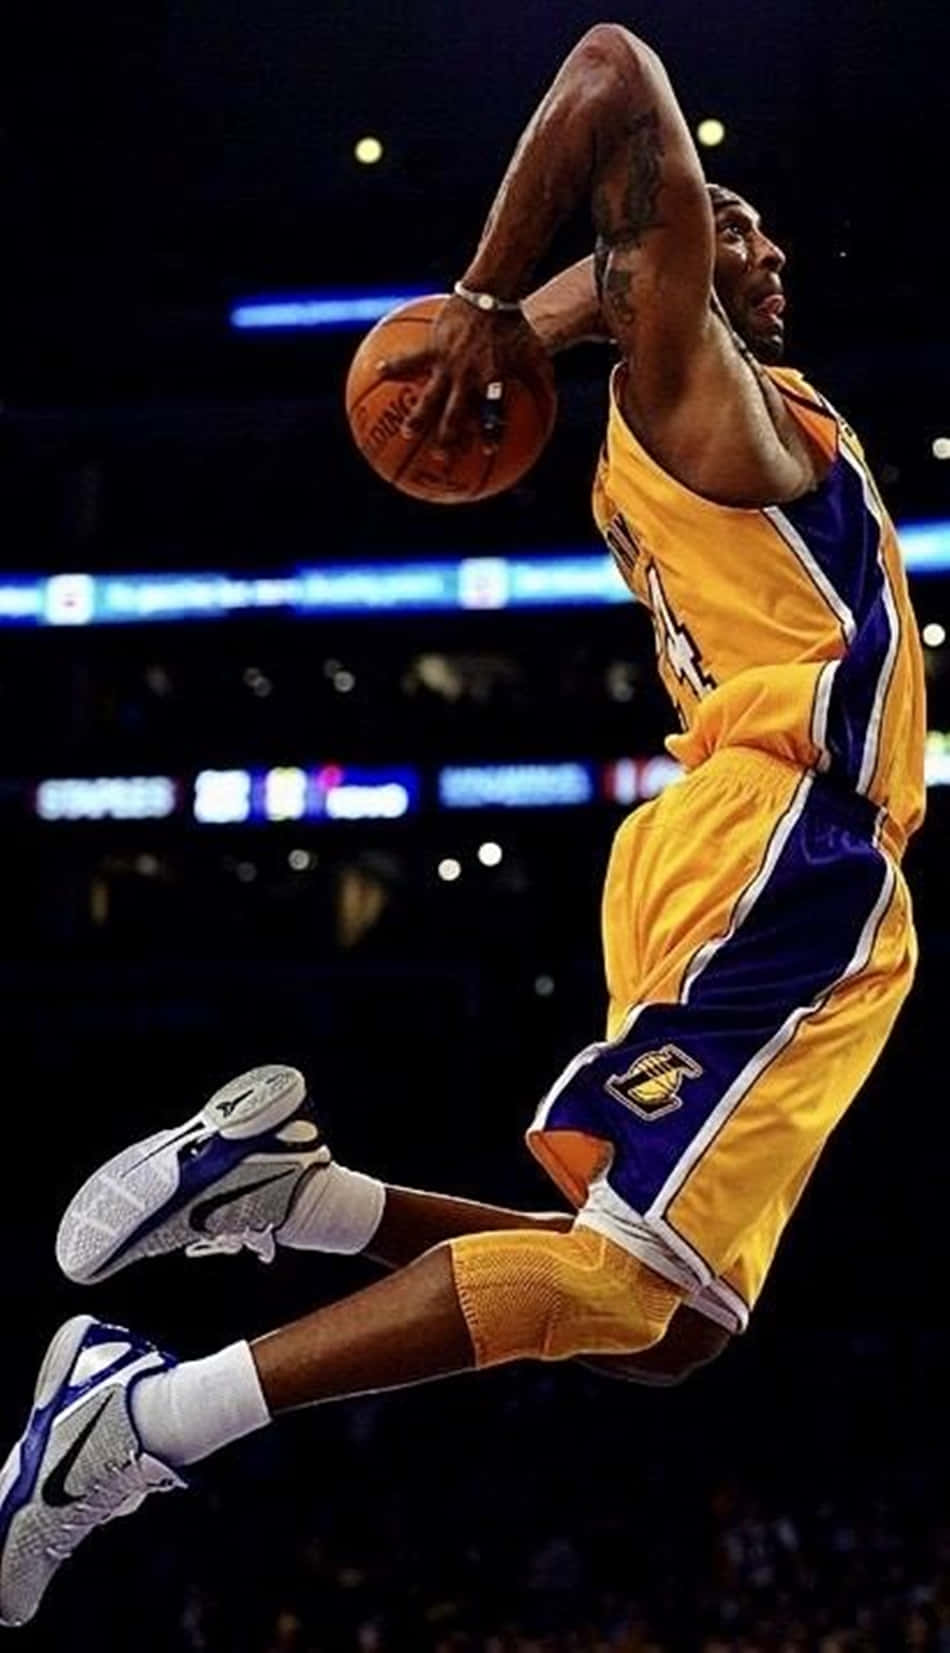 "Kobe Bryant showing off his impressive dunking abilities" Wallpaper